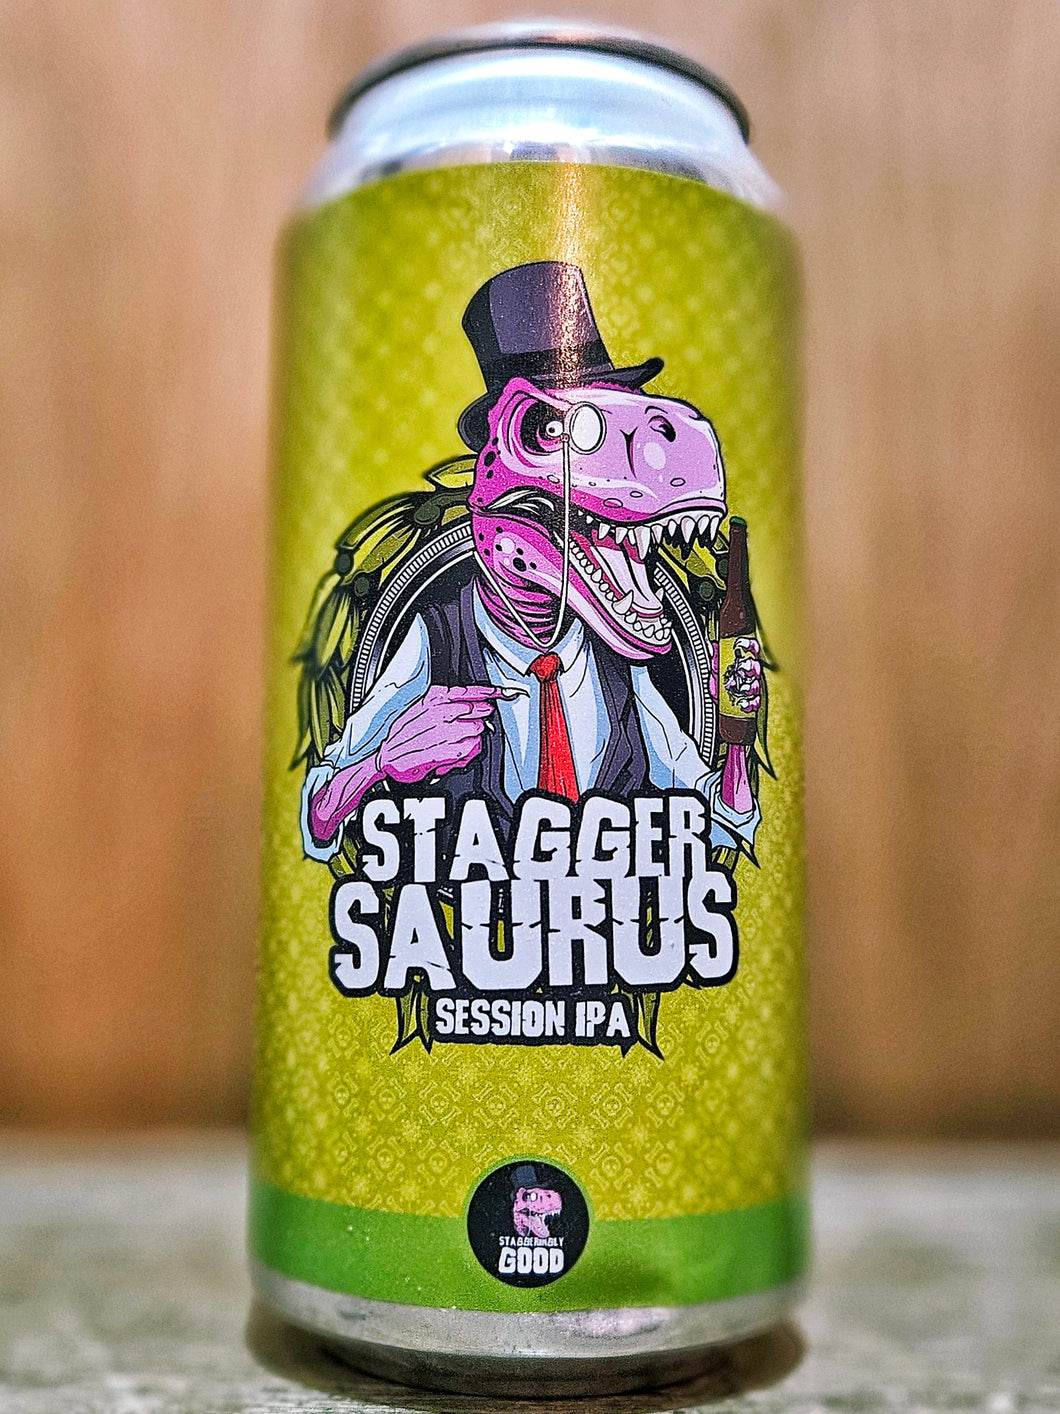 Staggeringly Good - Staggersaurus